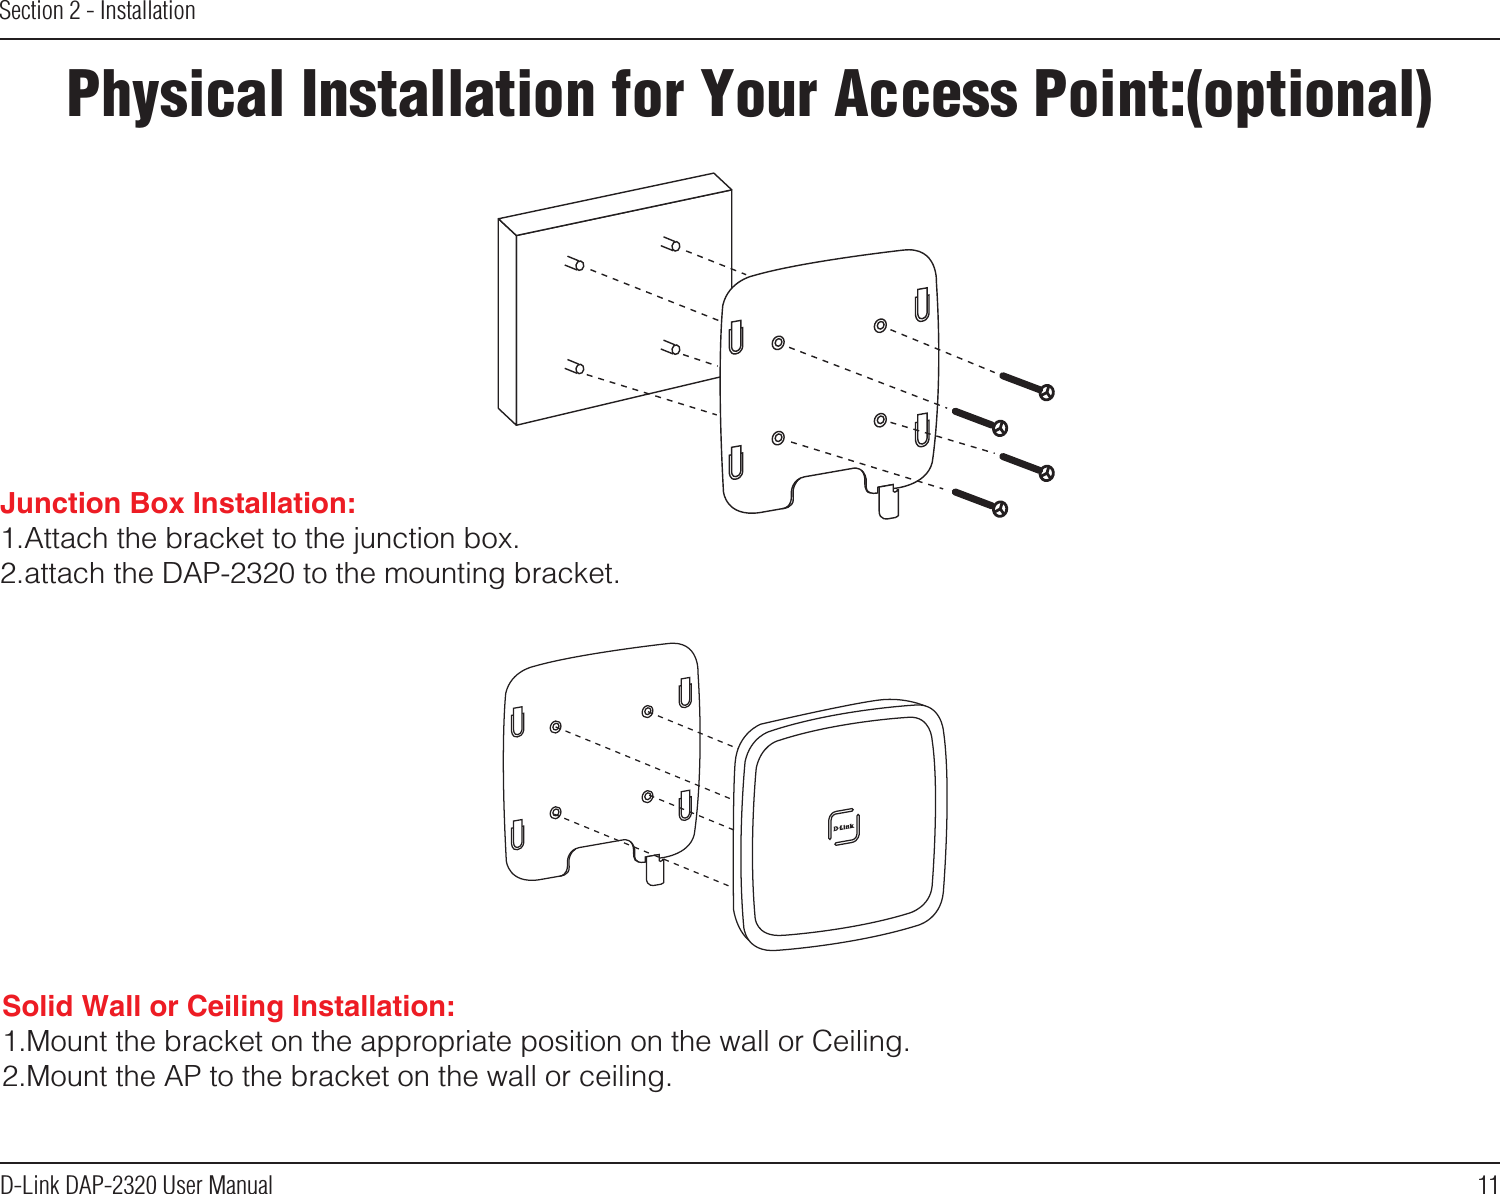 11D-Link DAP-2320 User ManualSection 2 - InstallationPhysical Installation for Your Access Point:(optional)Solid Wall or Ceiling Installation: 1.Mount the bracket on the appropriate position on the wall or Ceiling.2.Mount the AP to the bracket on the wall or ceiling.Junction Box Installation: 1.Attach the bracket to the junction box.2.attach the DAP-2320 to the mounting bracket. 